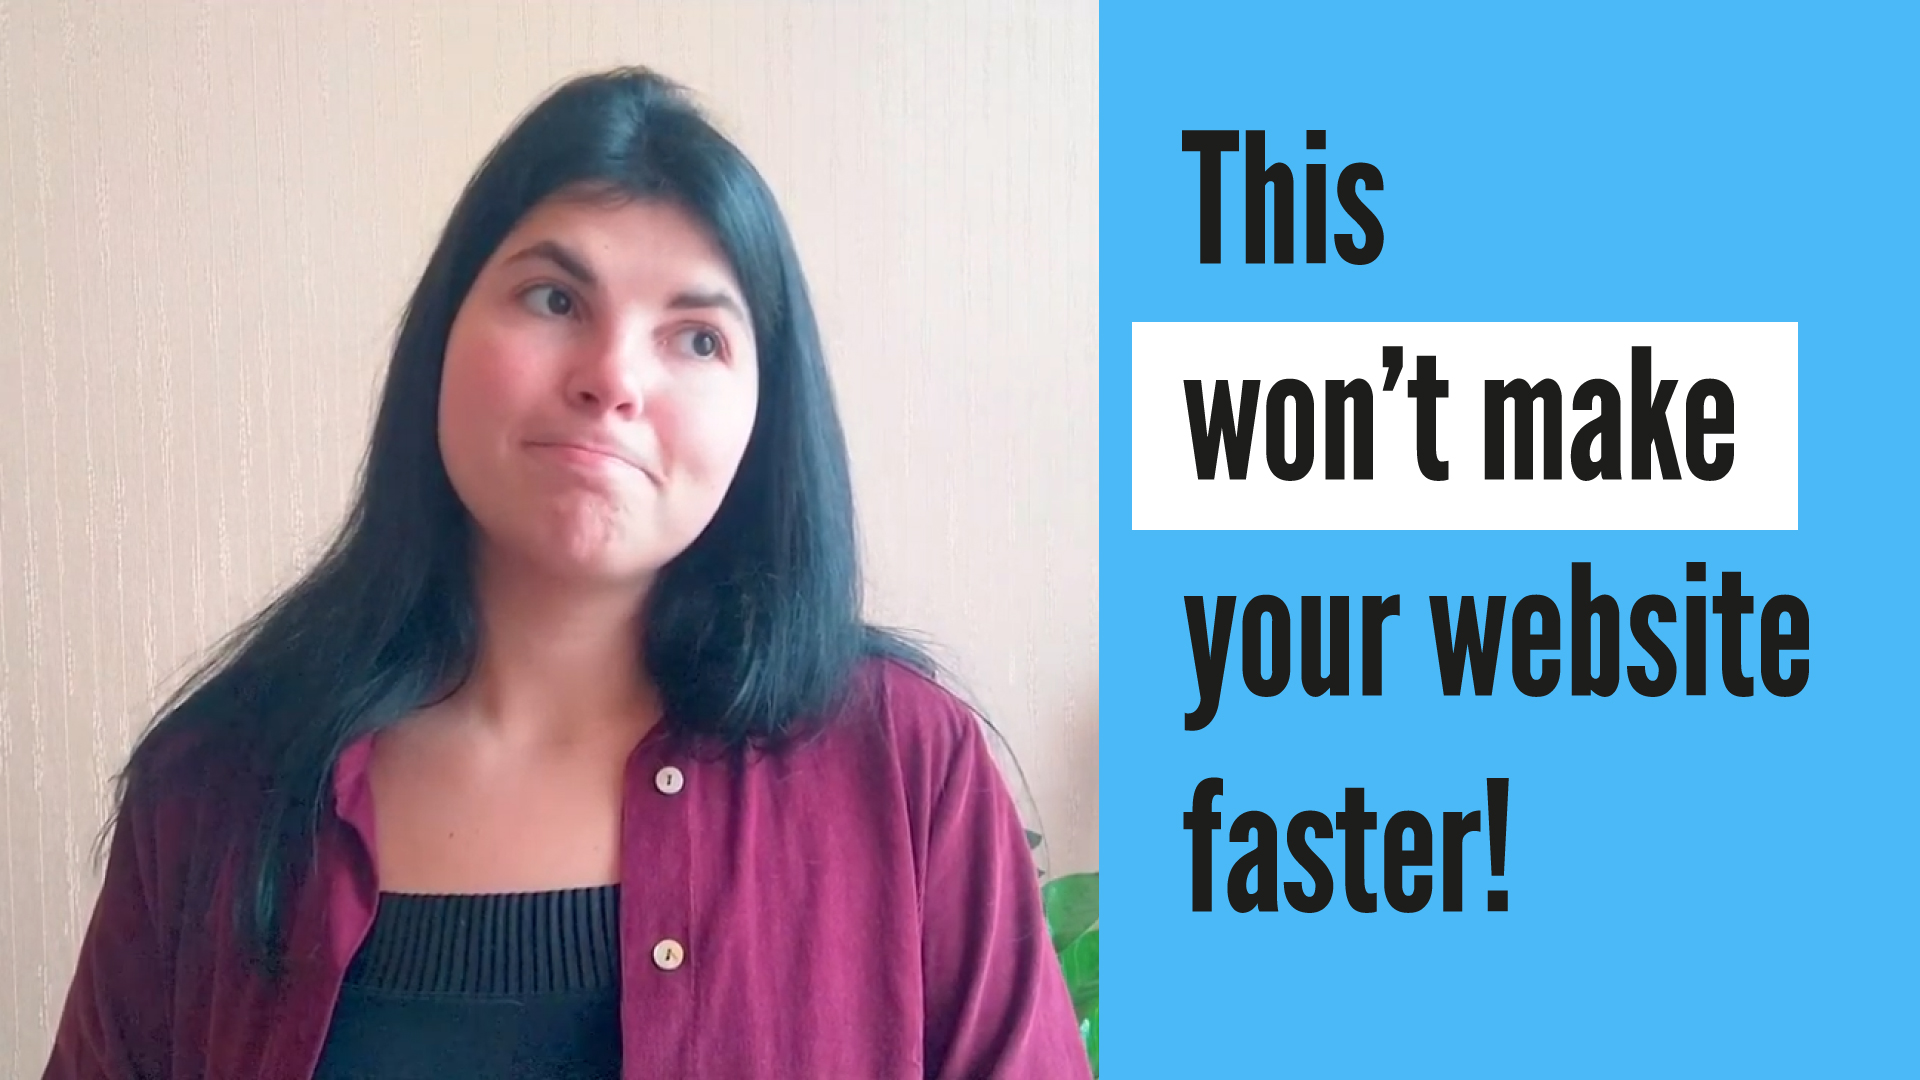 How to speed up WordPress site: 5 popular recommendations that don’t work [WordFest 2021]